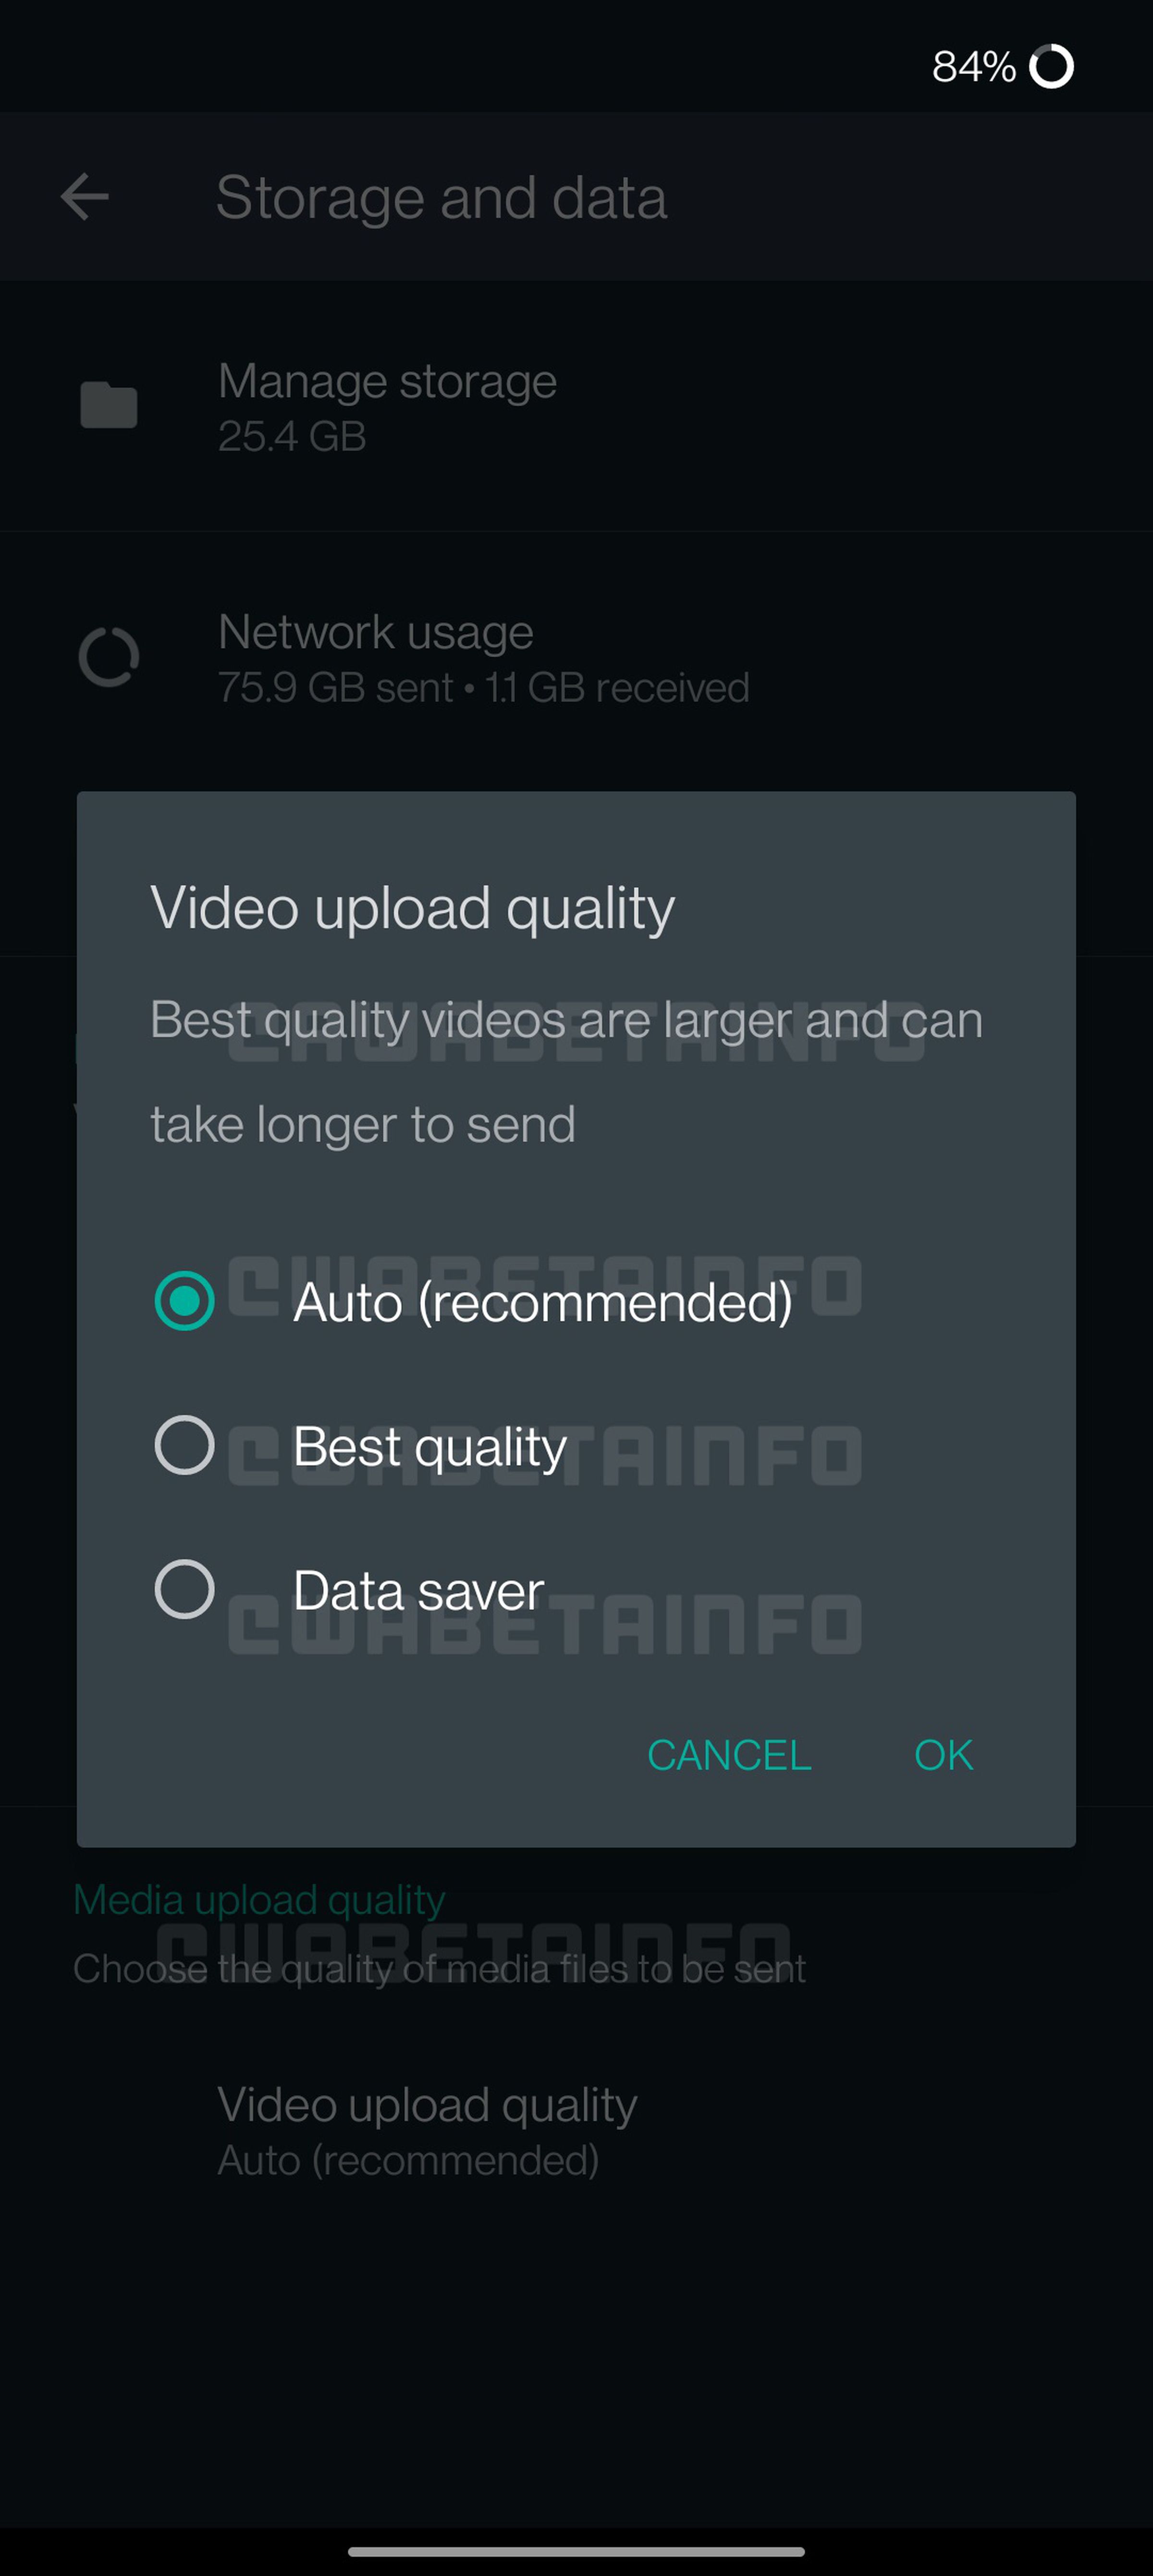 The in-development option for video quality.